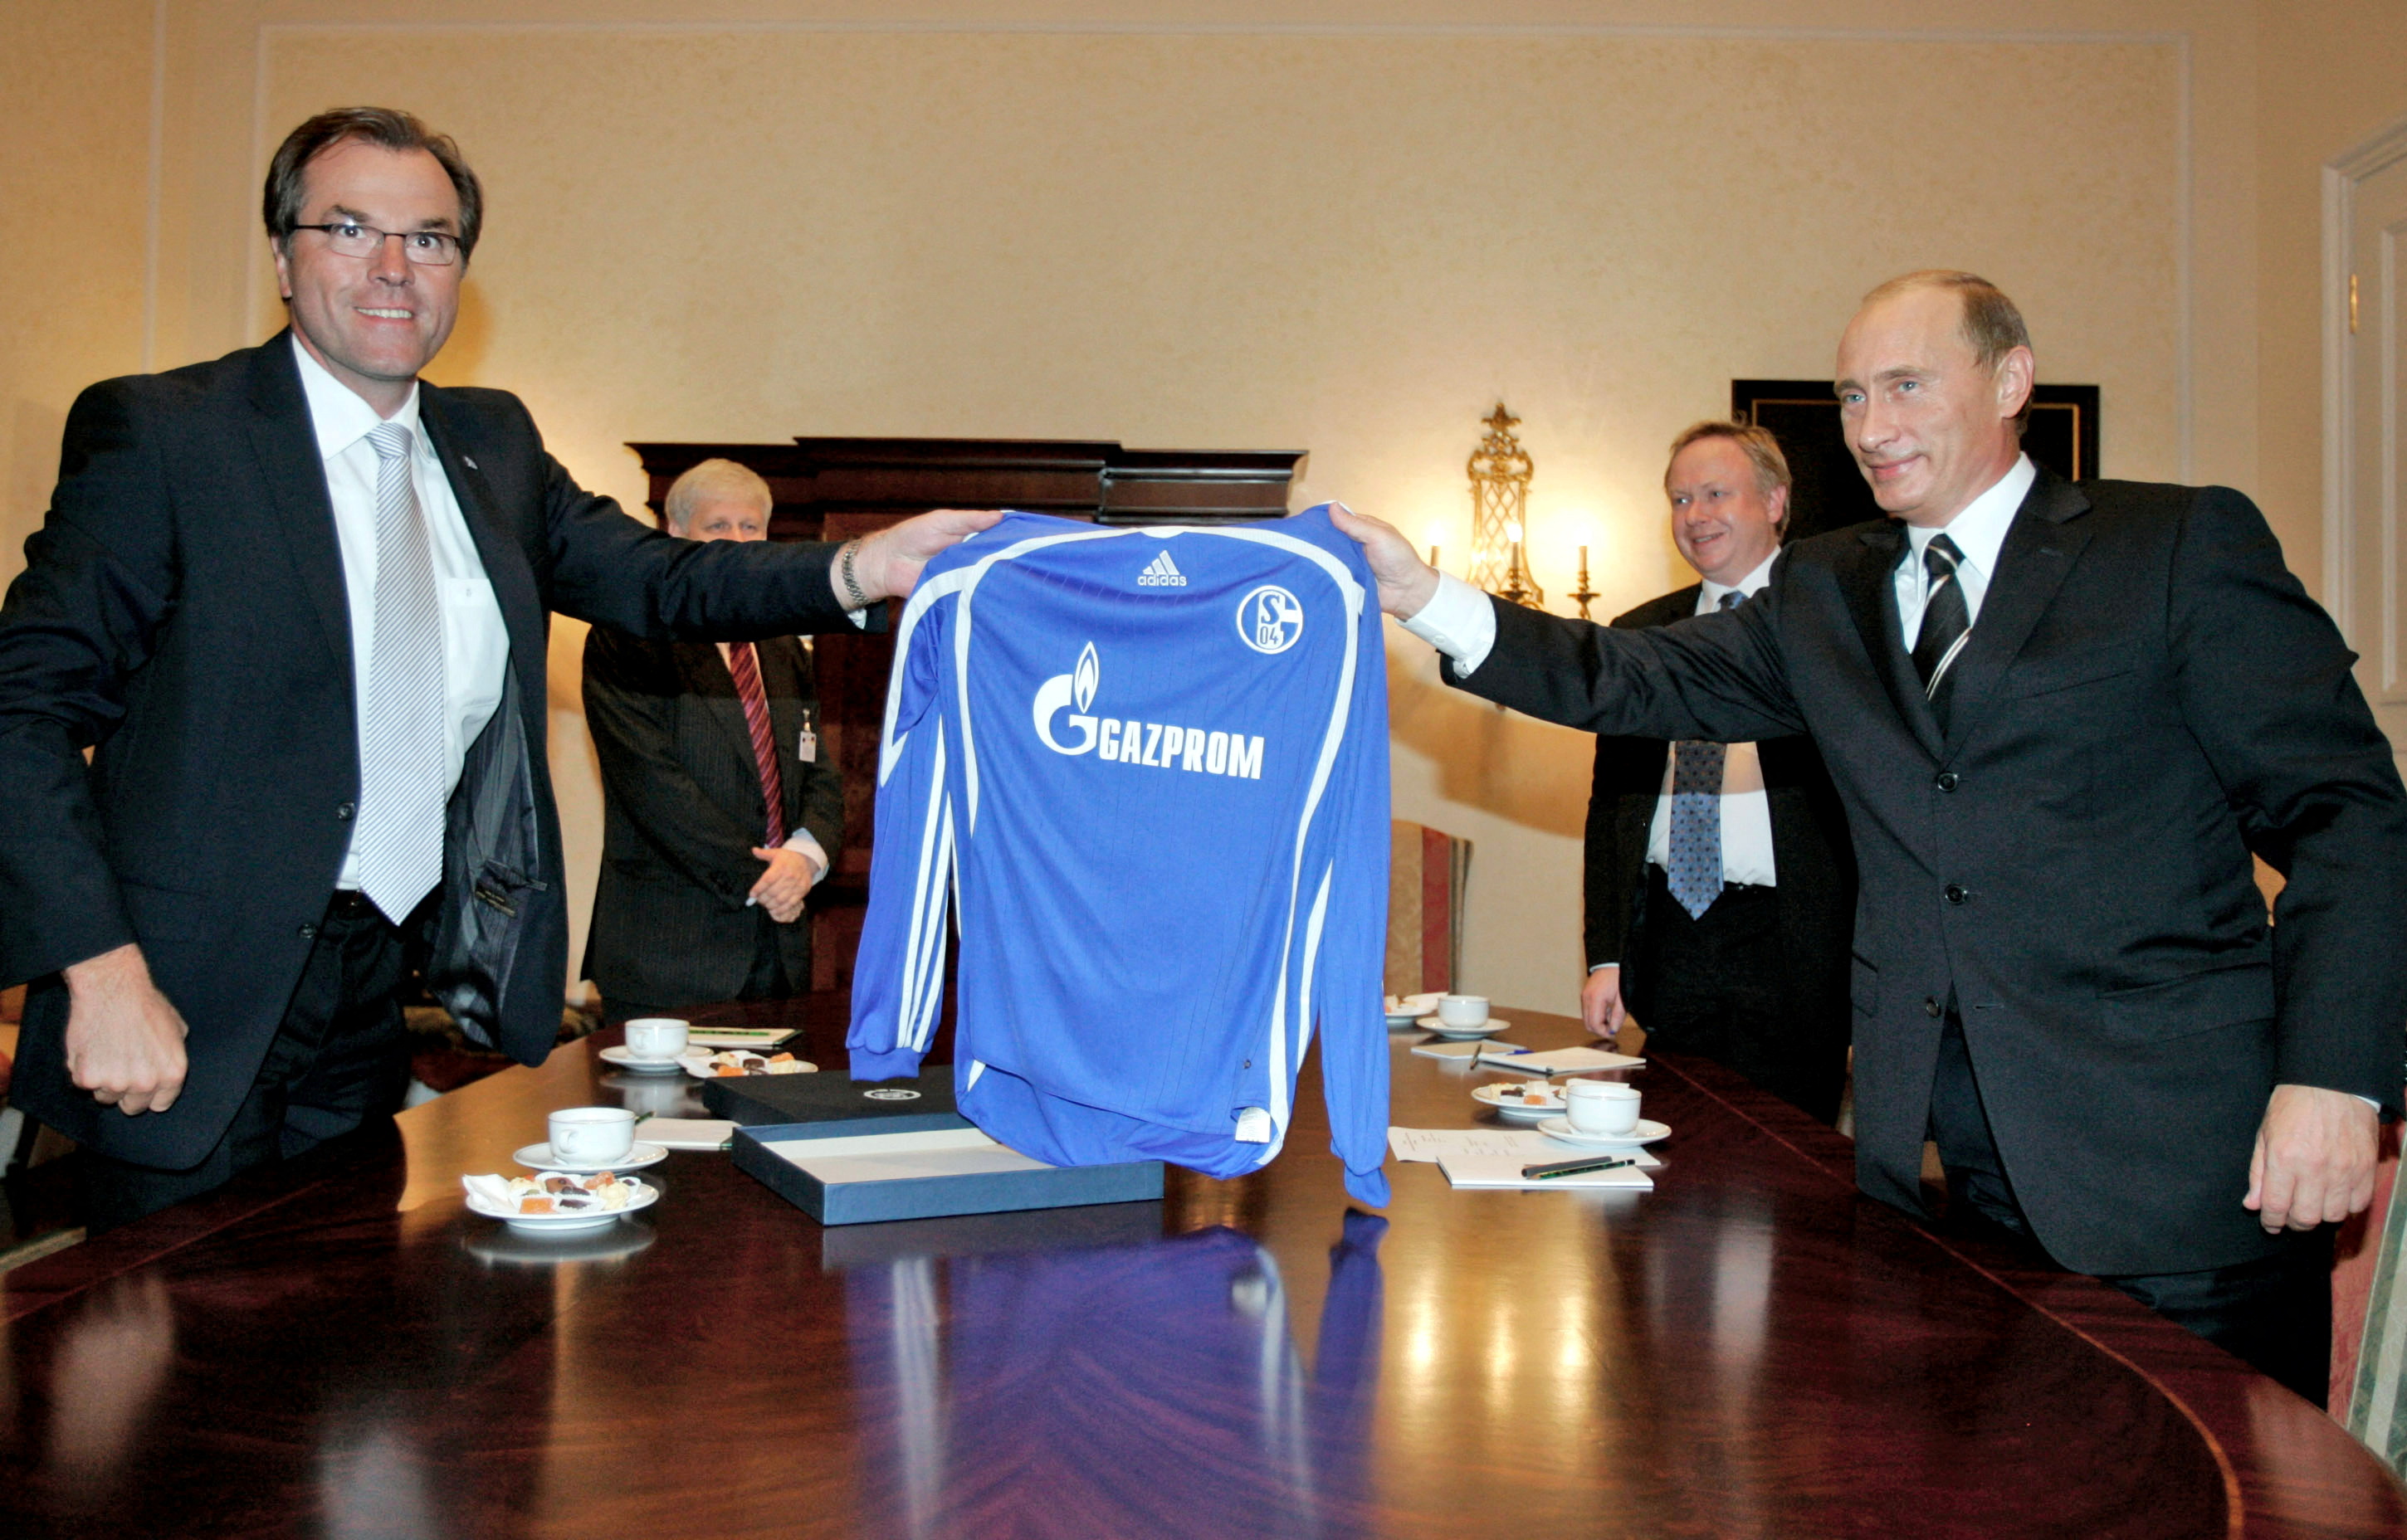 Toennies of German soccer club Schalke 04 and Russian President Putin hold jersey with Gazprom logo in Dresden